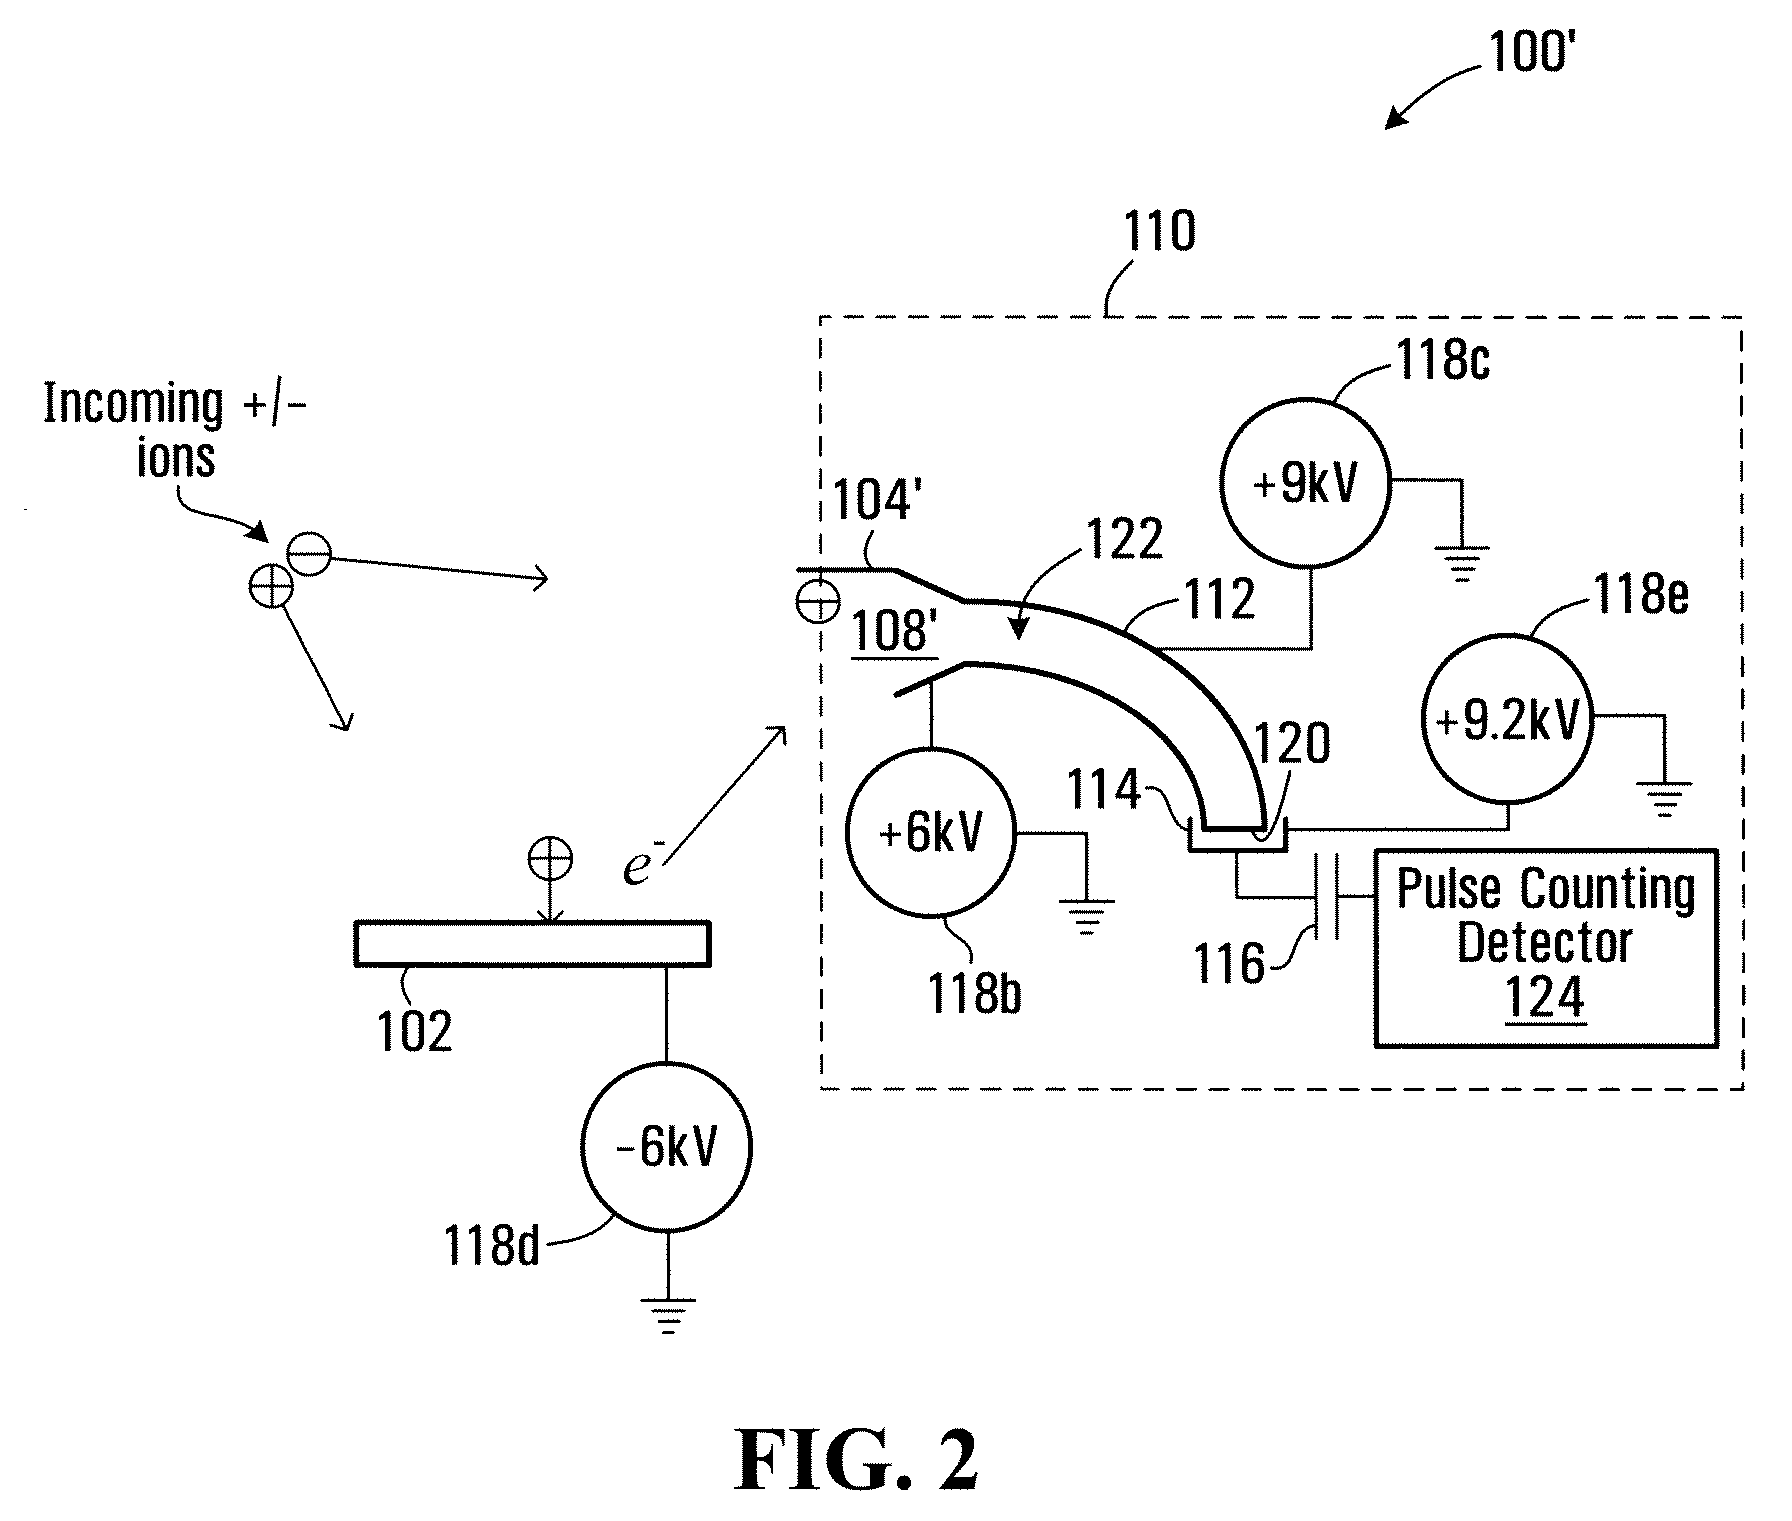 Method and apparatus for detecting positively charged and negatively charged ionized particles